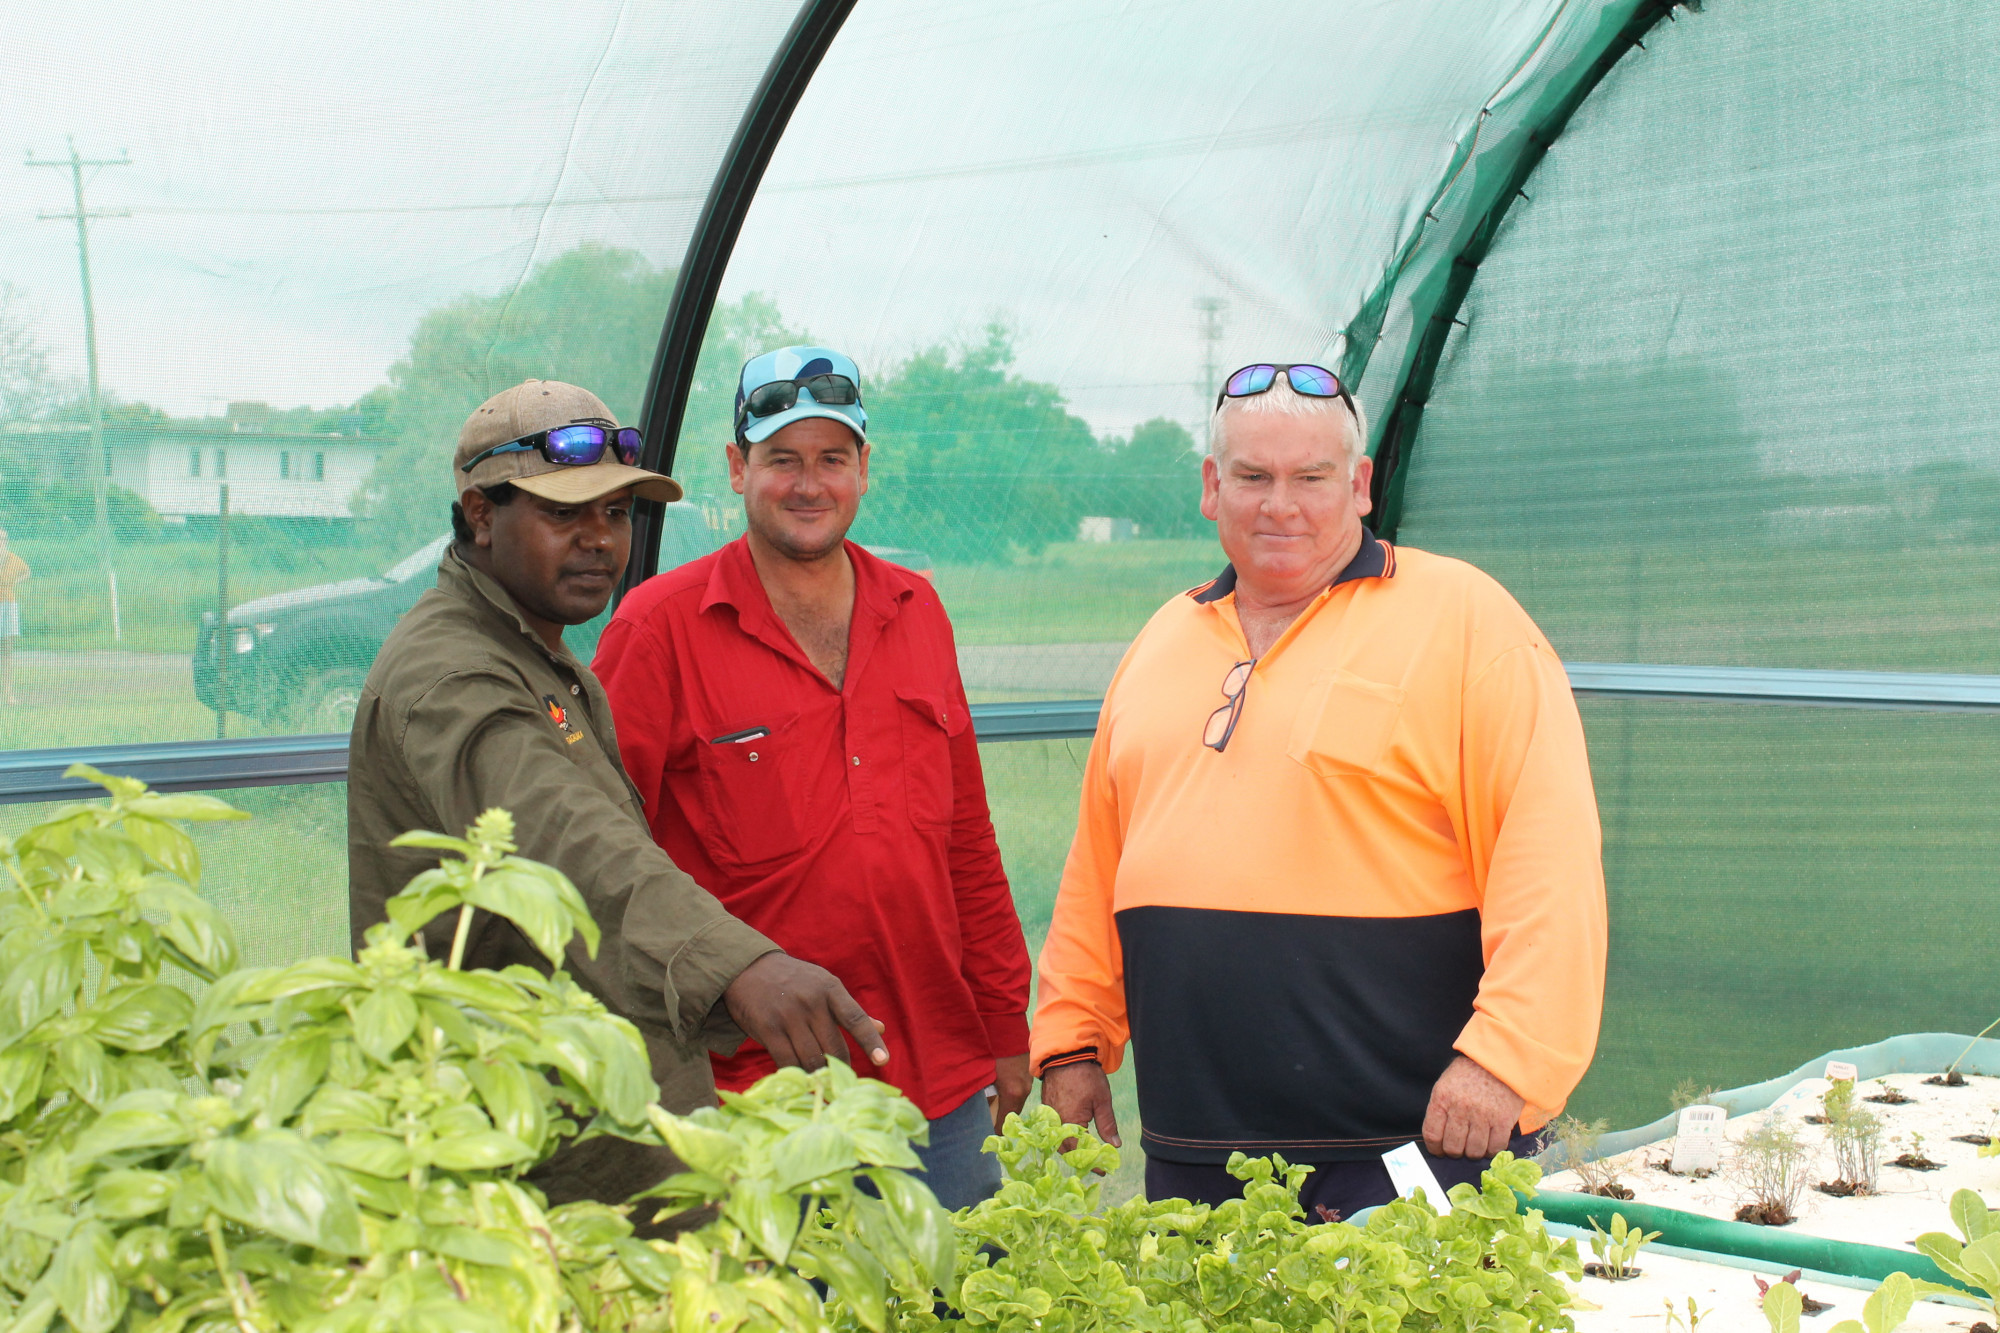 Croydon now have fresh produce and less water waste with their new Aquaponics Centre available for the community to access